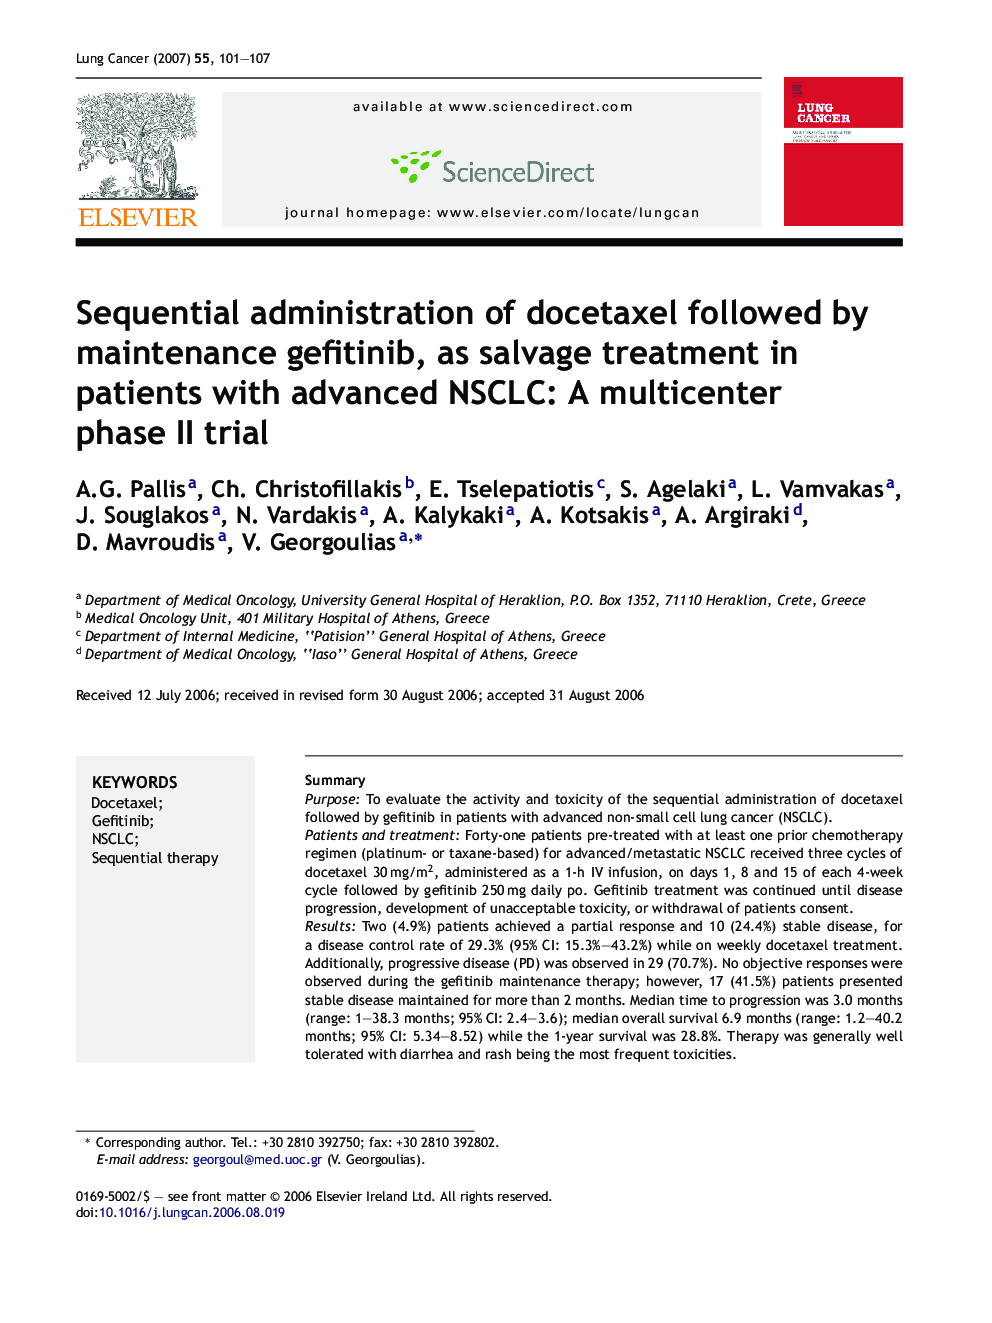 Sequential administration of docetaxel followed by maintenance gefitinib, as salvage treatment in patients with advanced NSCLC: A multicenter phase II trial